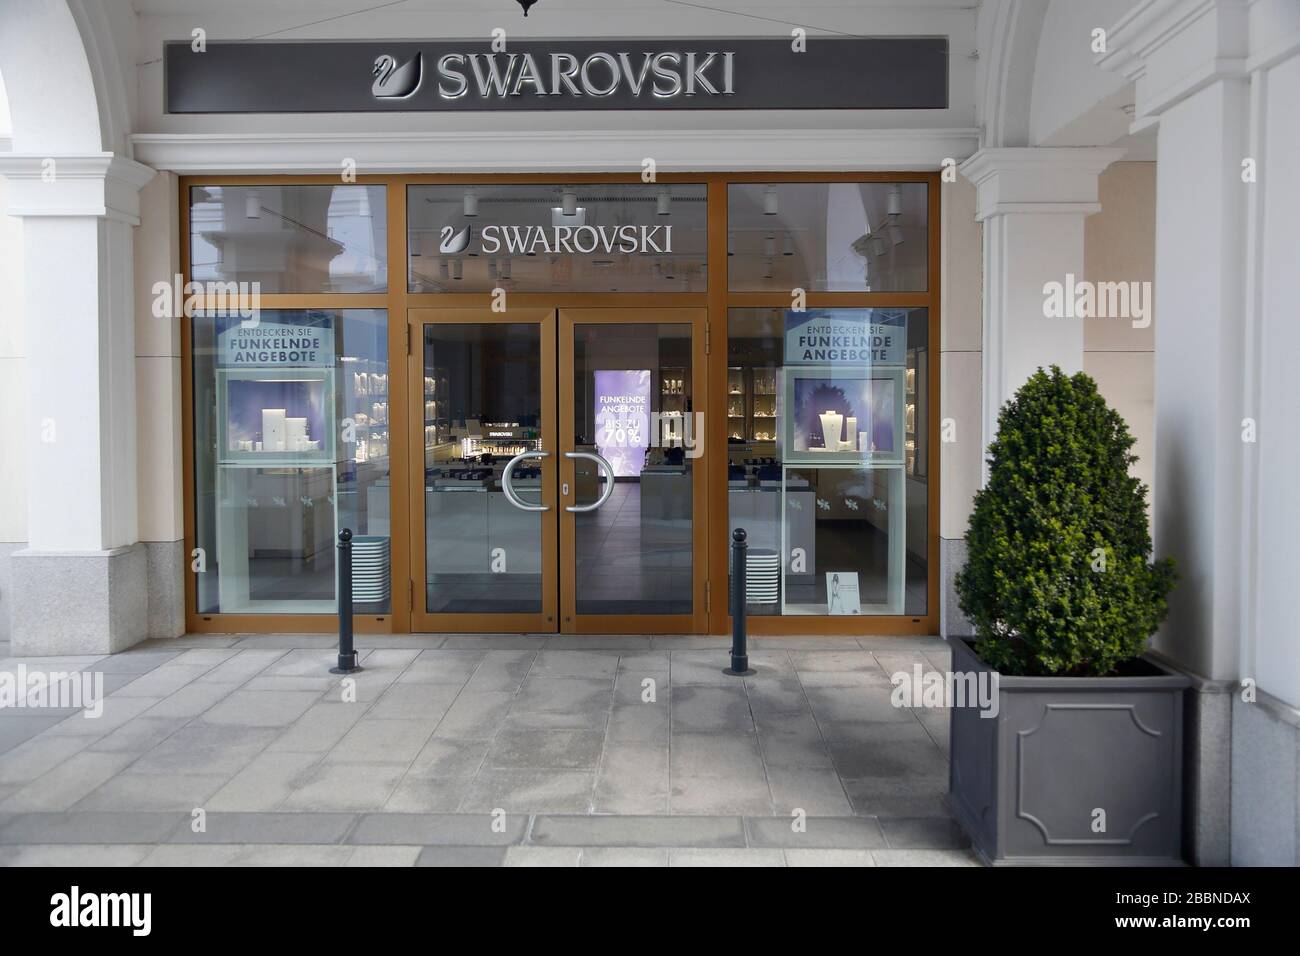 Swarovski Outlet High Resolution Stock Photography and Images - Alamy